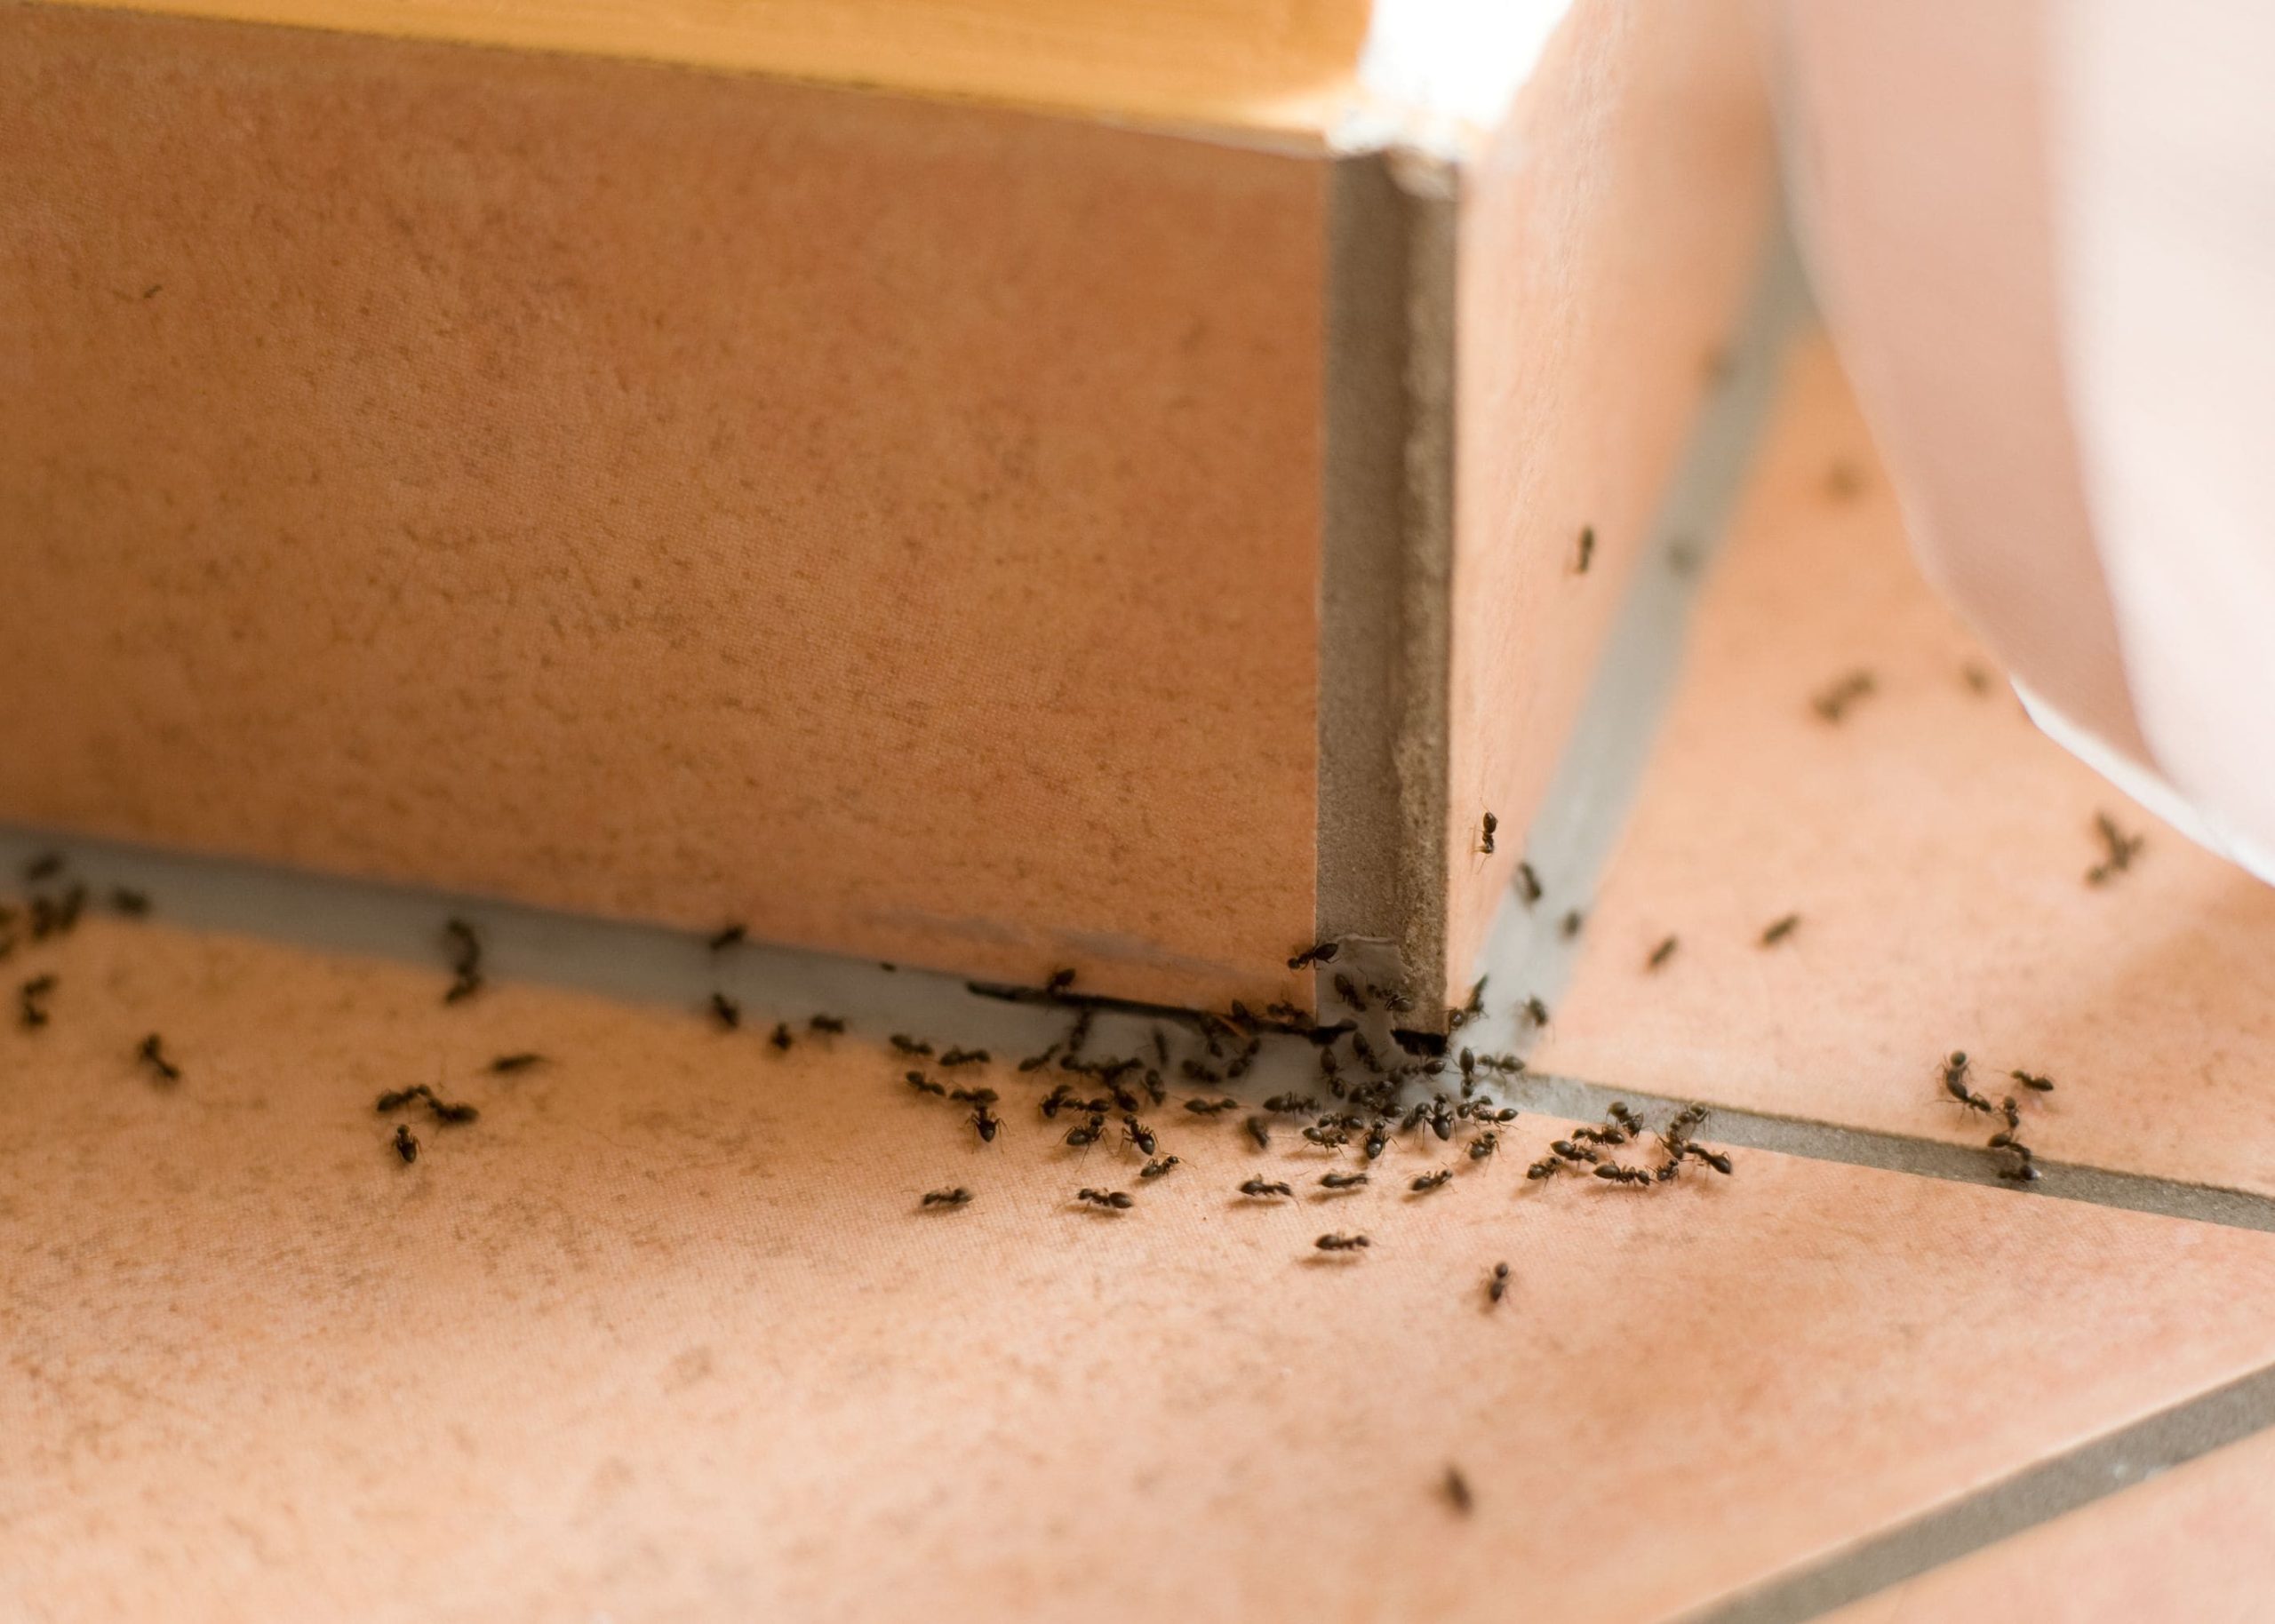 Complete Guide for Ants Control in Boise, Idaho